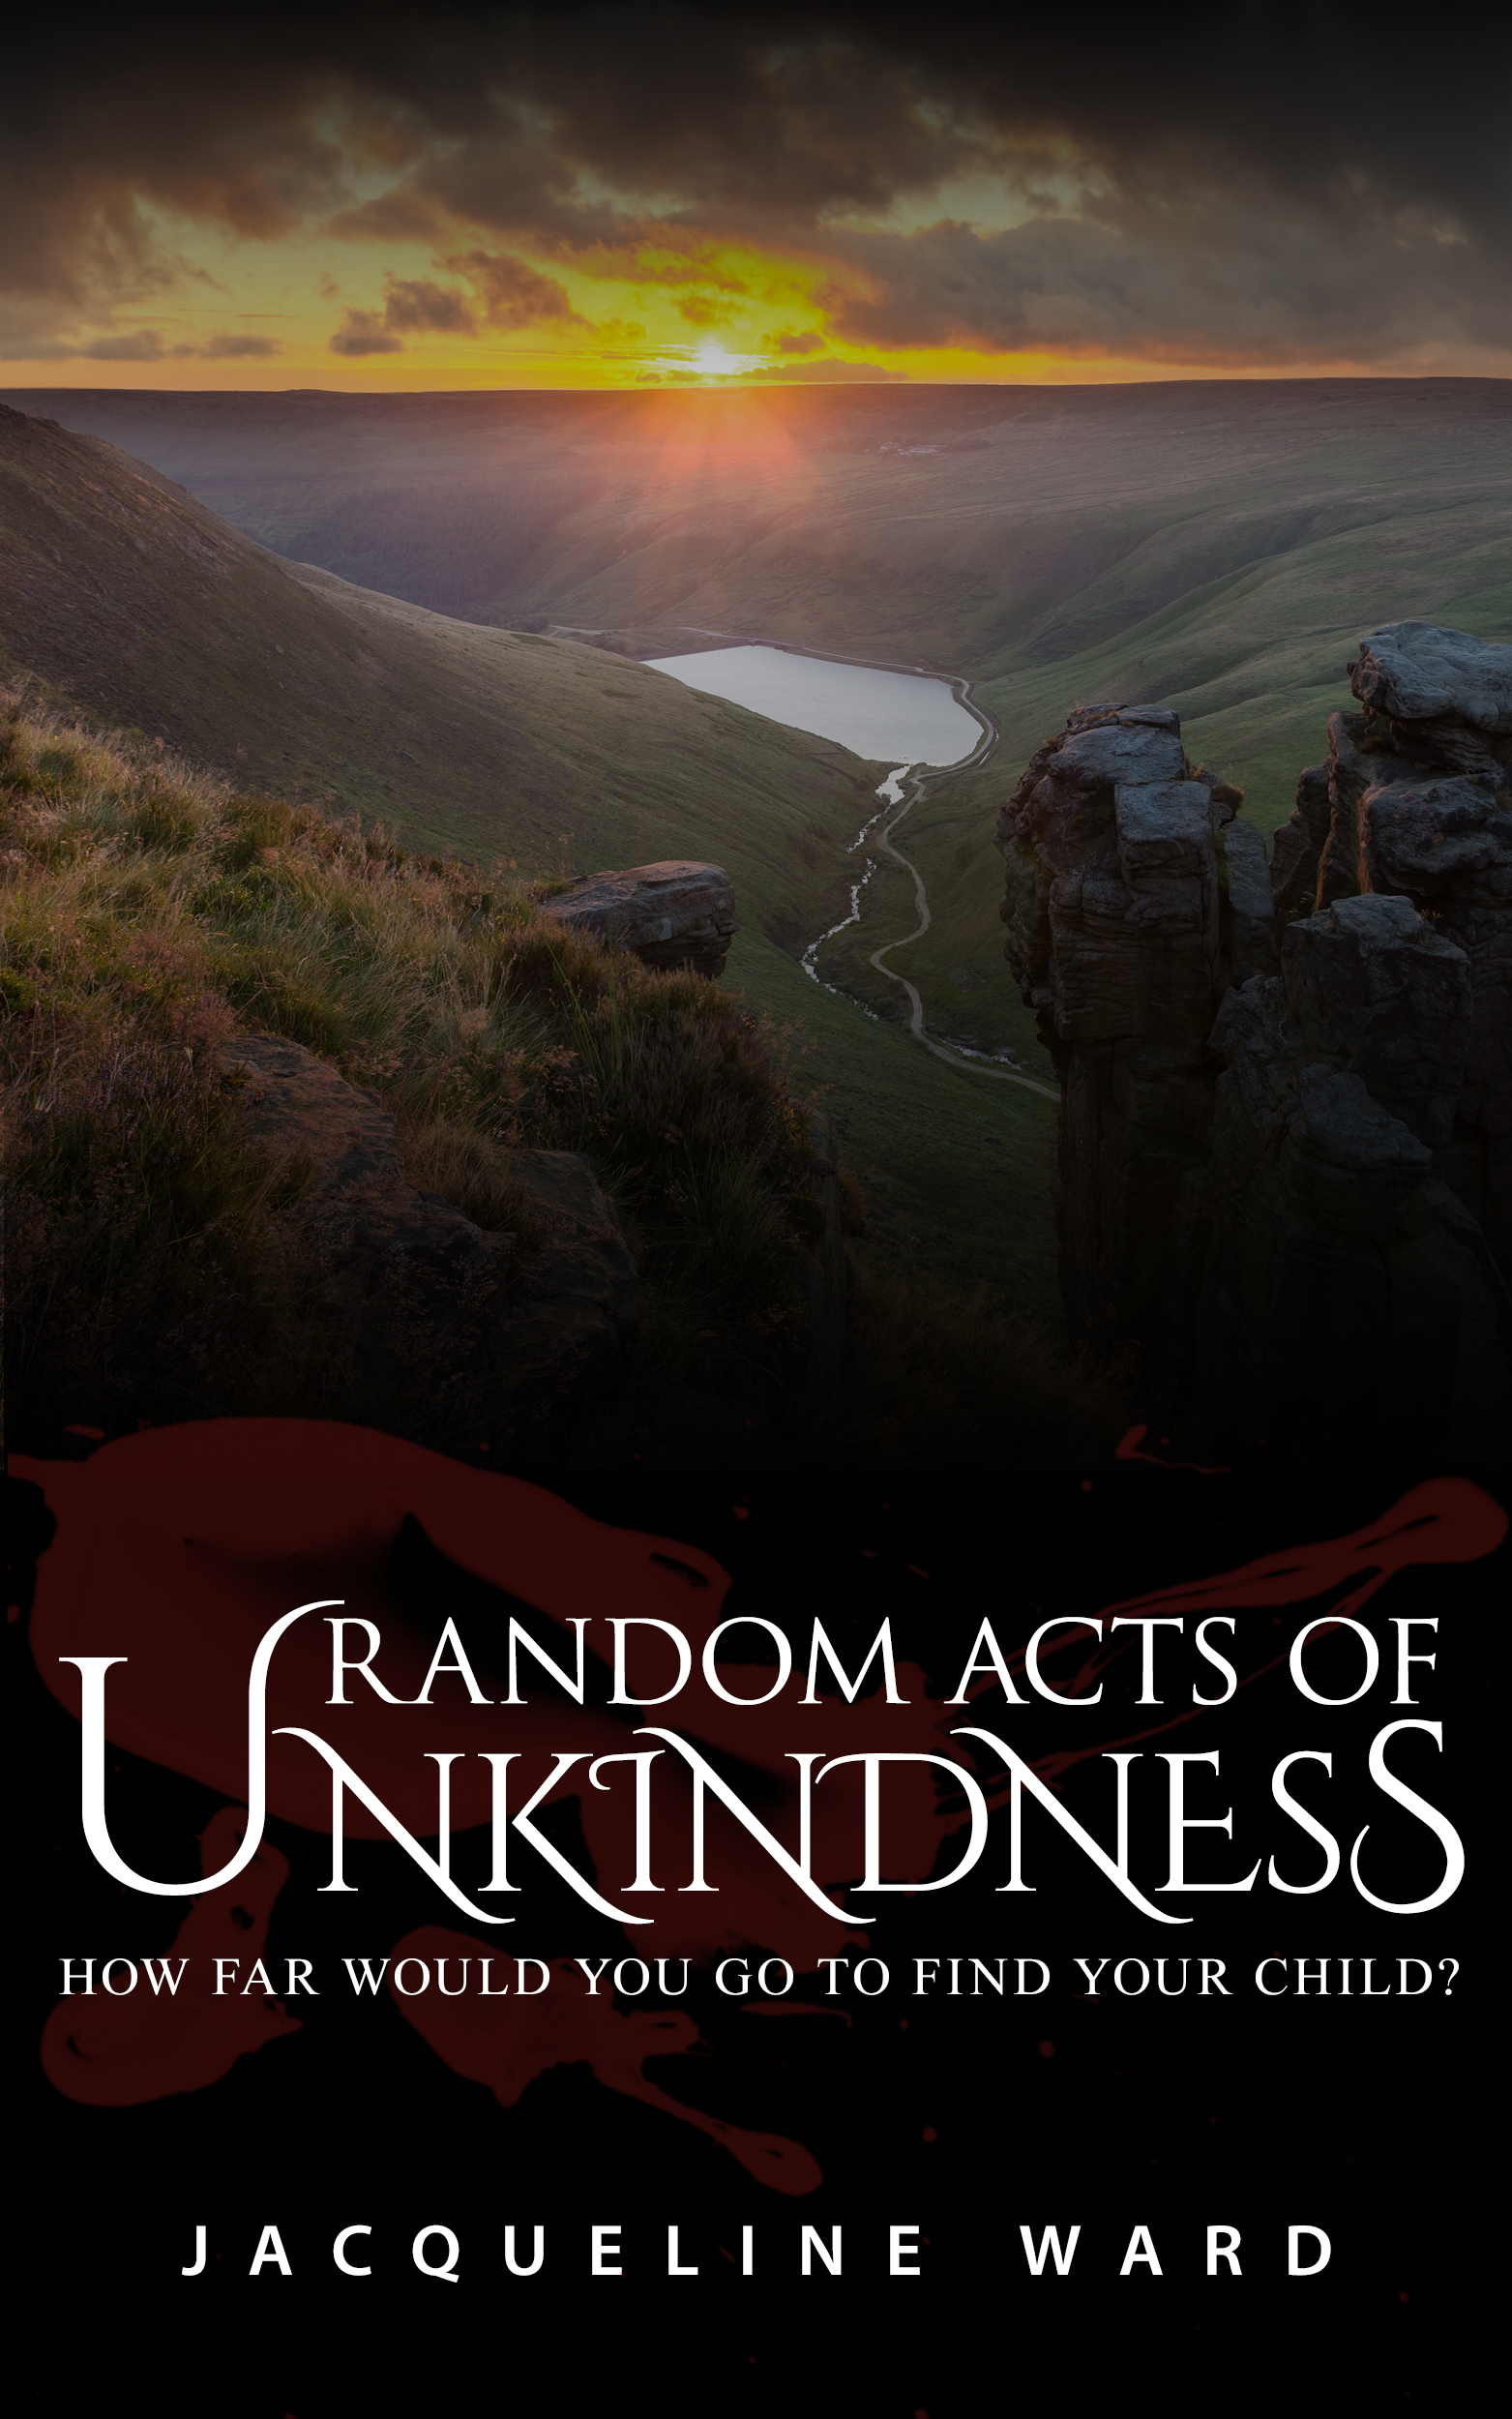 Release Day Blitz for RANDOM ACTS OF UNKINDNESS by Jacqueline Ward